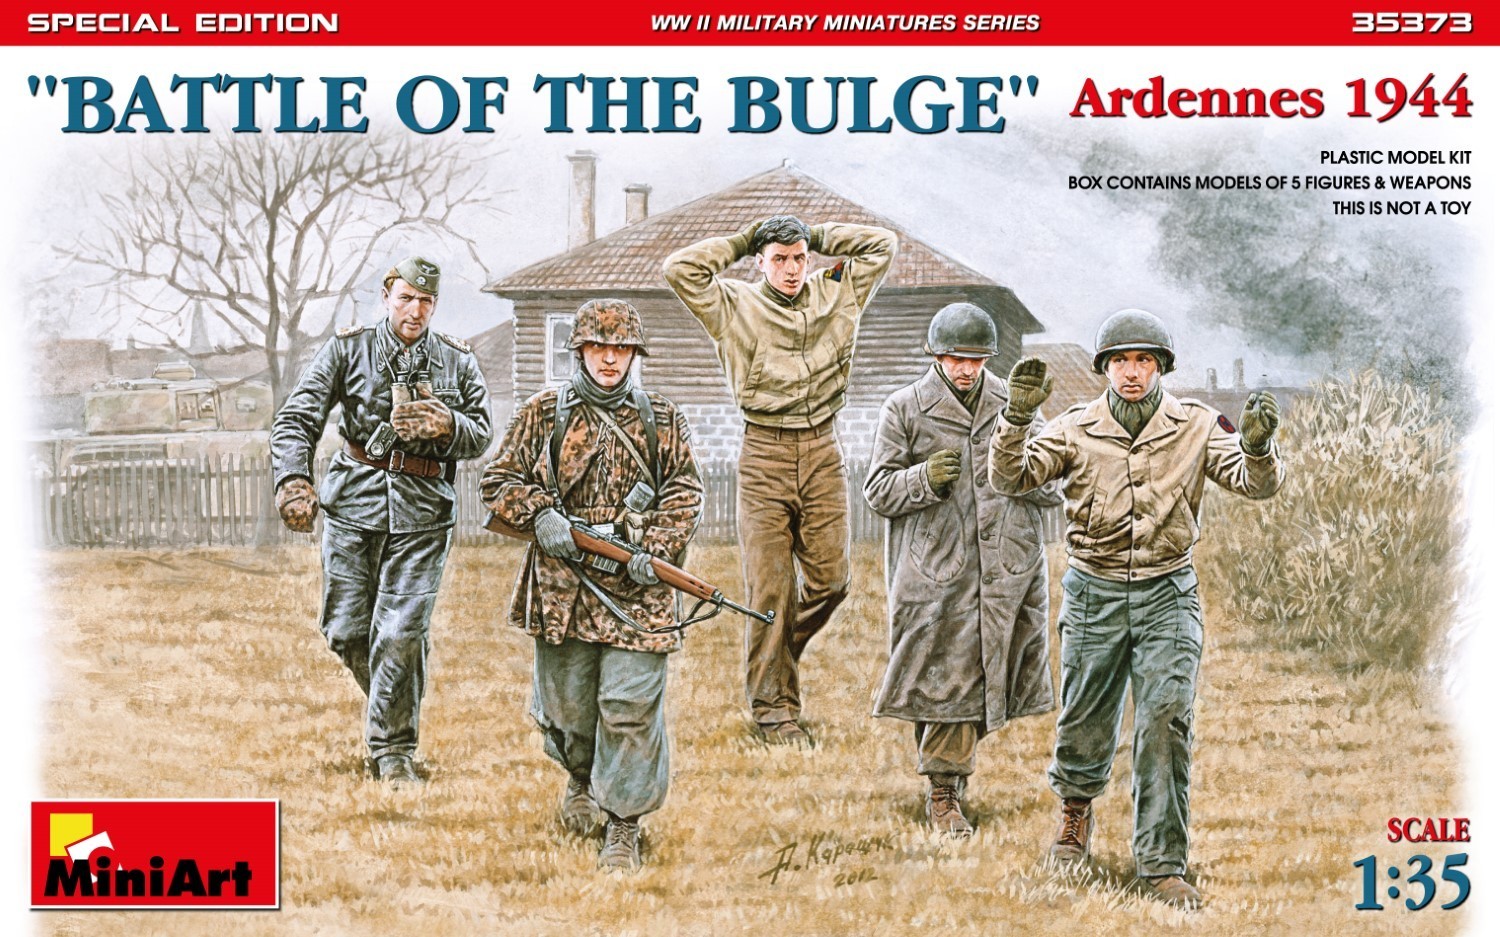 MiniArt 35373 "BATTLE OF THE BULGE". Ardennes 1944. SPECIAL EDITION